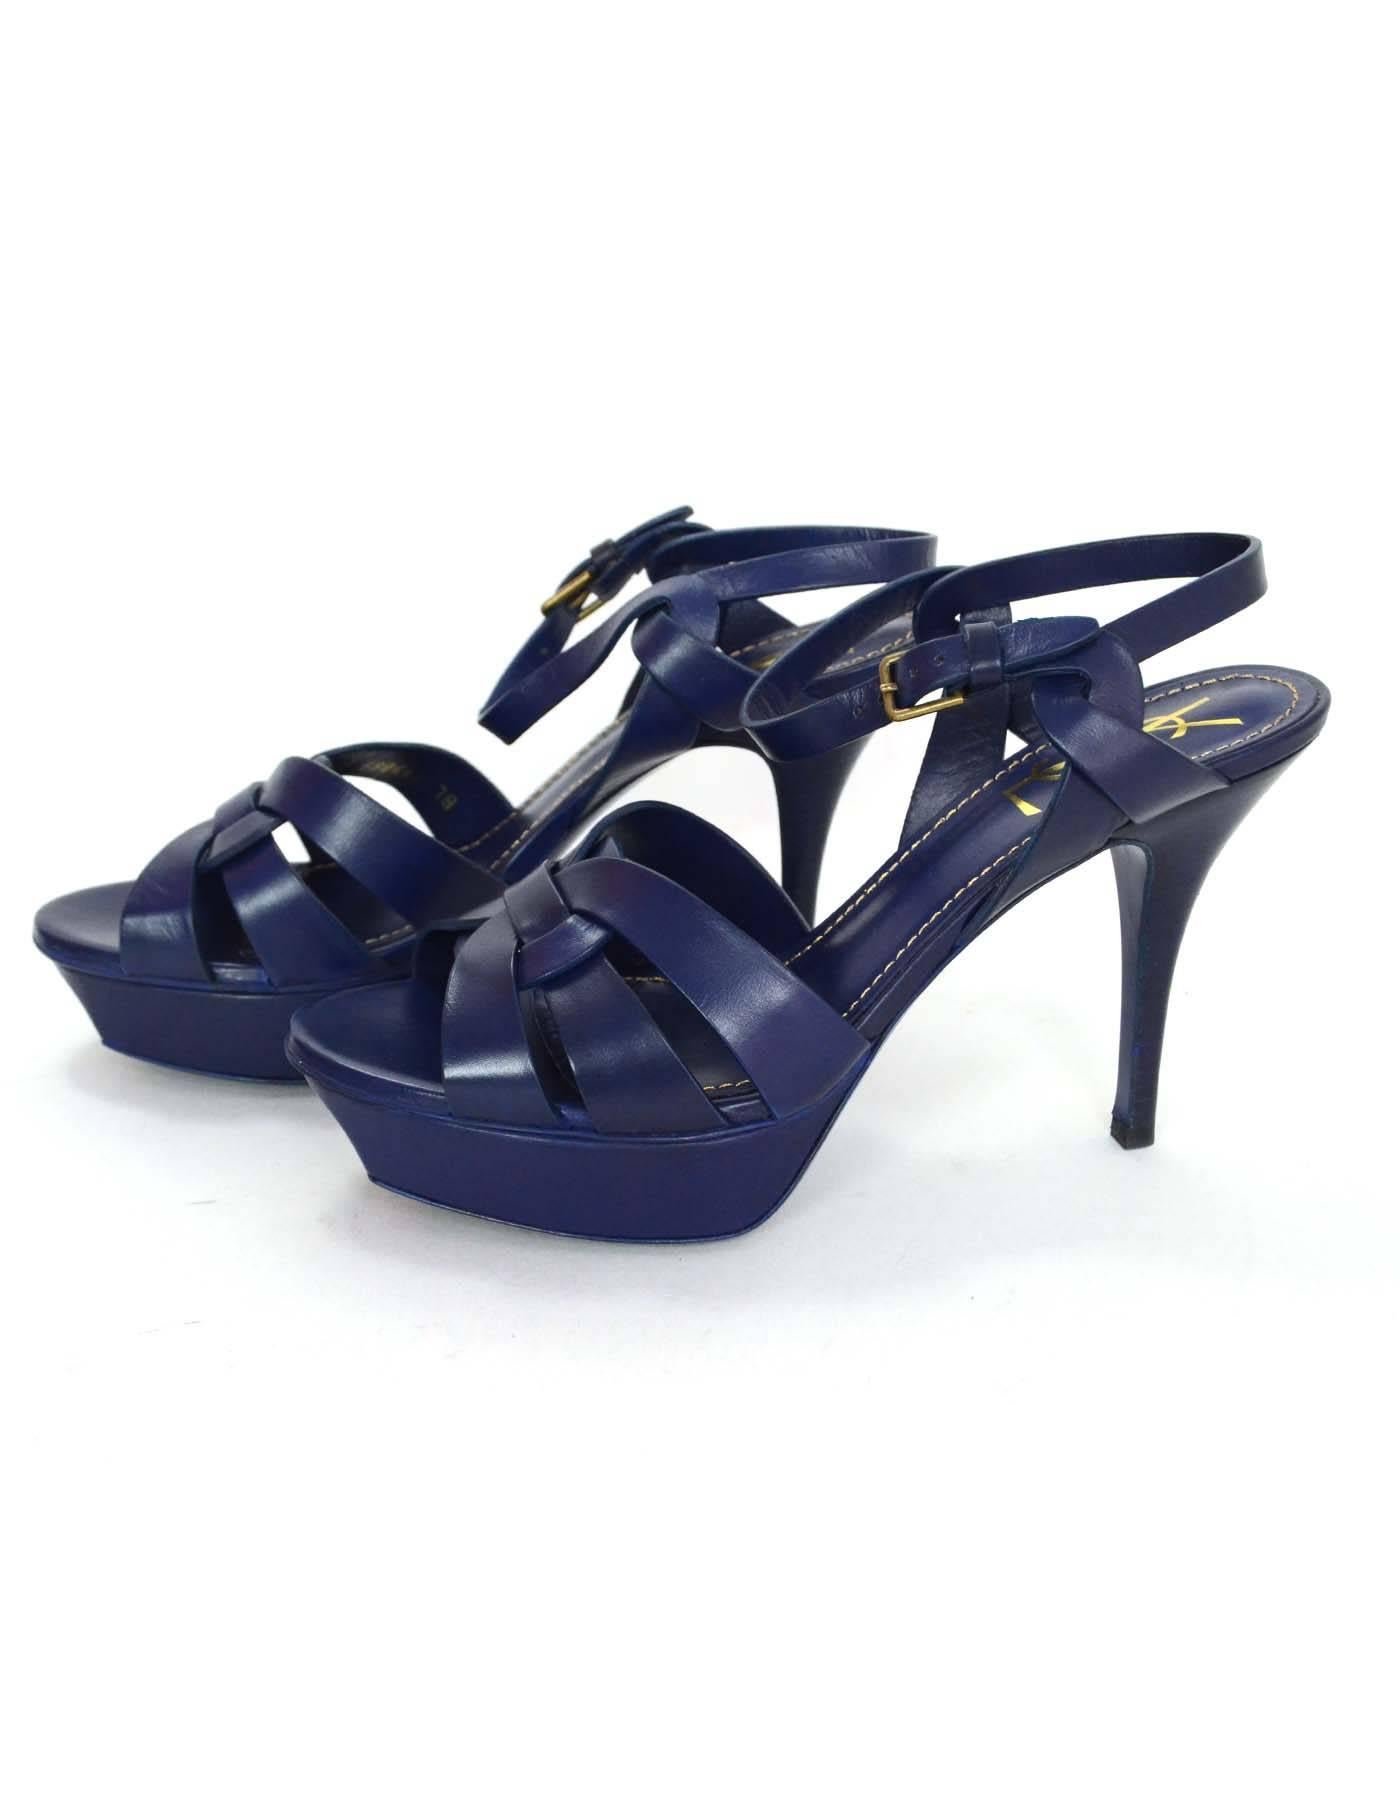 YSL Navy Leather Tribute 75 Strappy Sandals 
Made In: Italy
Color: Navy blue
Materials: Leather
Closure/Opening: Ankle buckle and notch closure
Sole Stamp: Yves Saint Laurent Made in Italy 38 1/2
Retail Price: $925 + tax
Overall Condition: